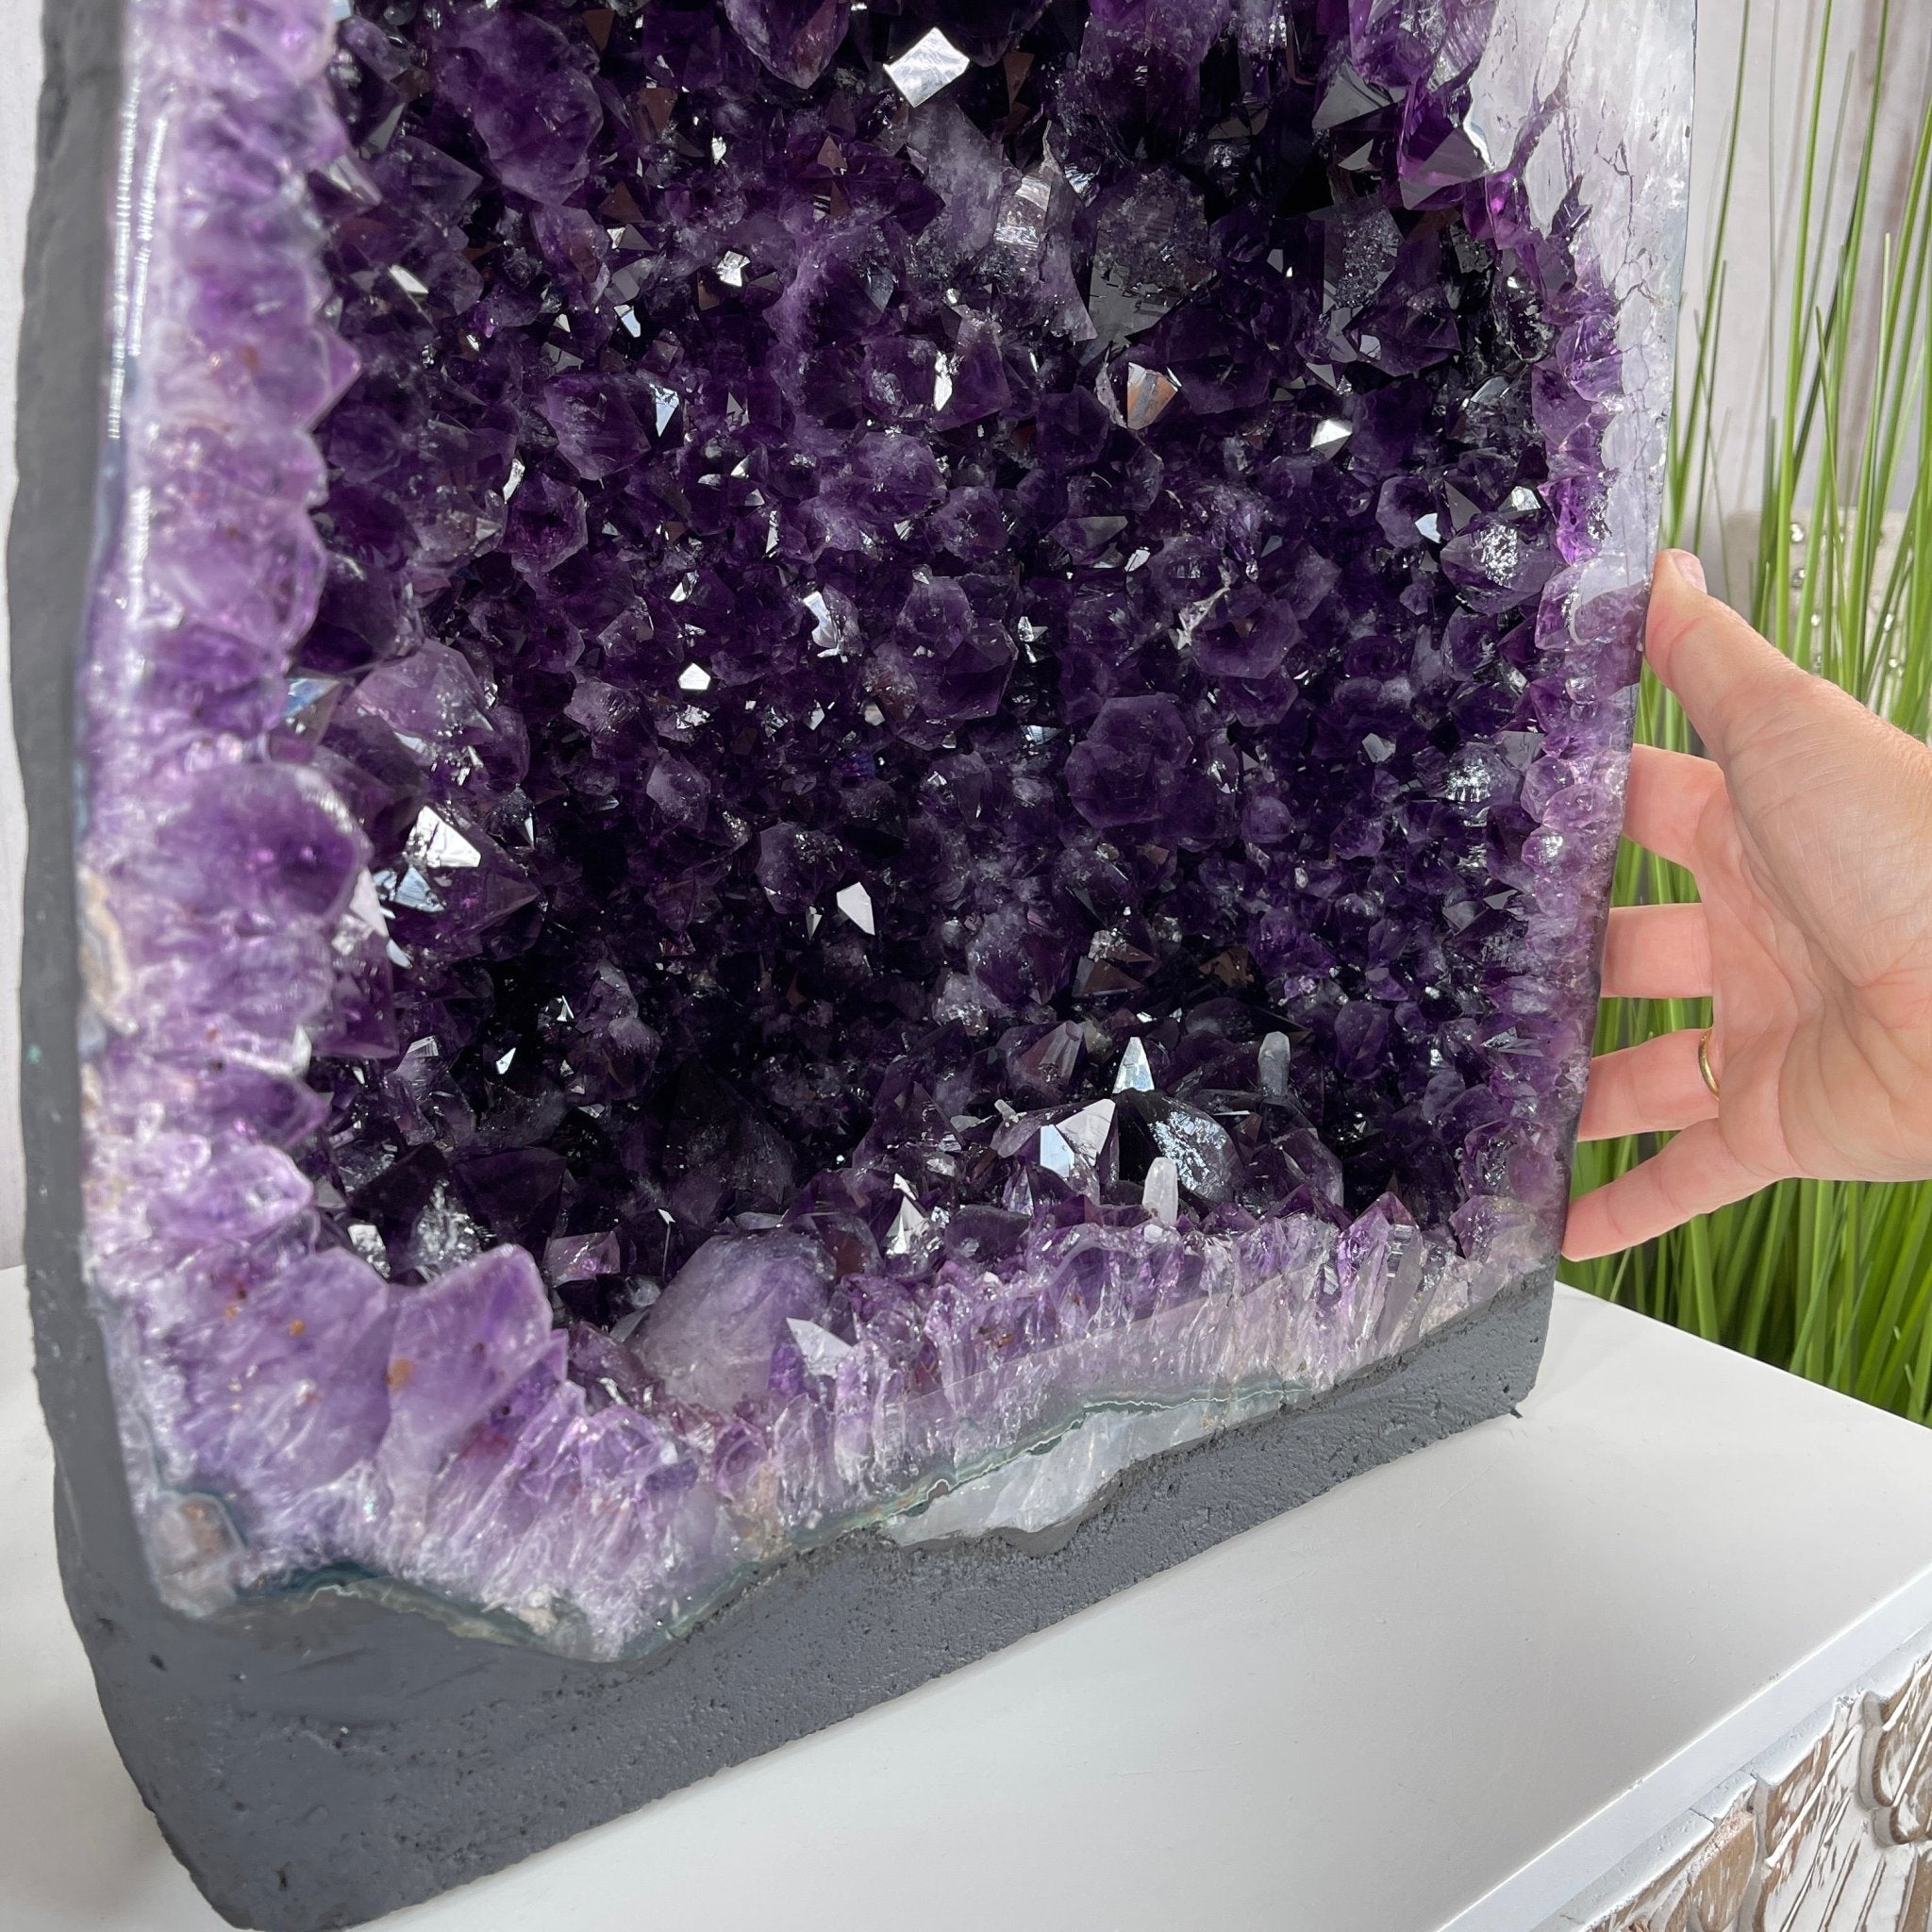 Extra Quality Brazilian Amethyst Cathedral, 20.75” tall & 73 lbs #5601-0444 by Brazil Gems - Brazil GemsBrazil GemsExtra Quality Brazilian Amethyst Cathedral, 20.75” tall & 73 lbs #5601-0444 by Brazil GemsCathedrals5601-0444